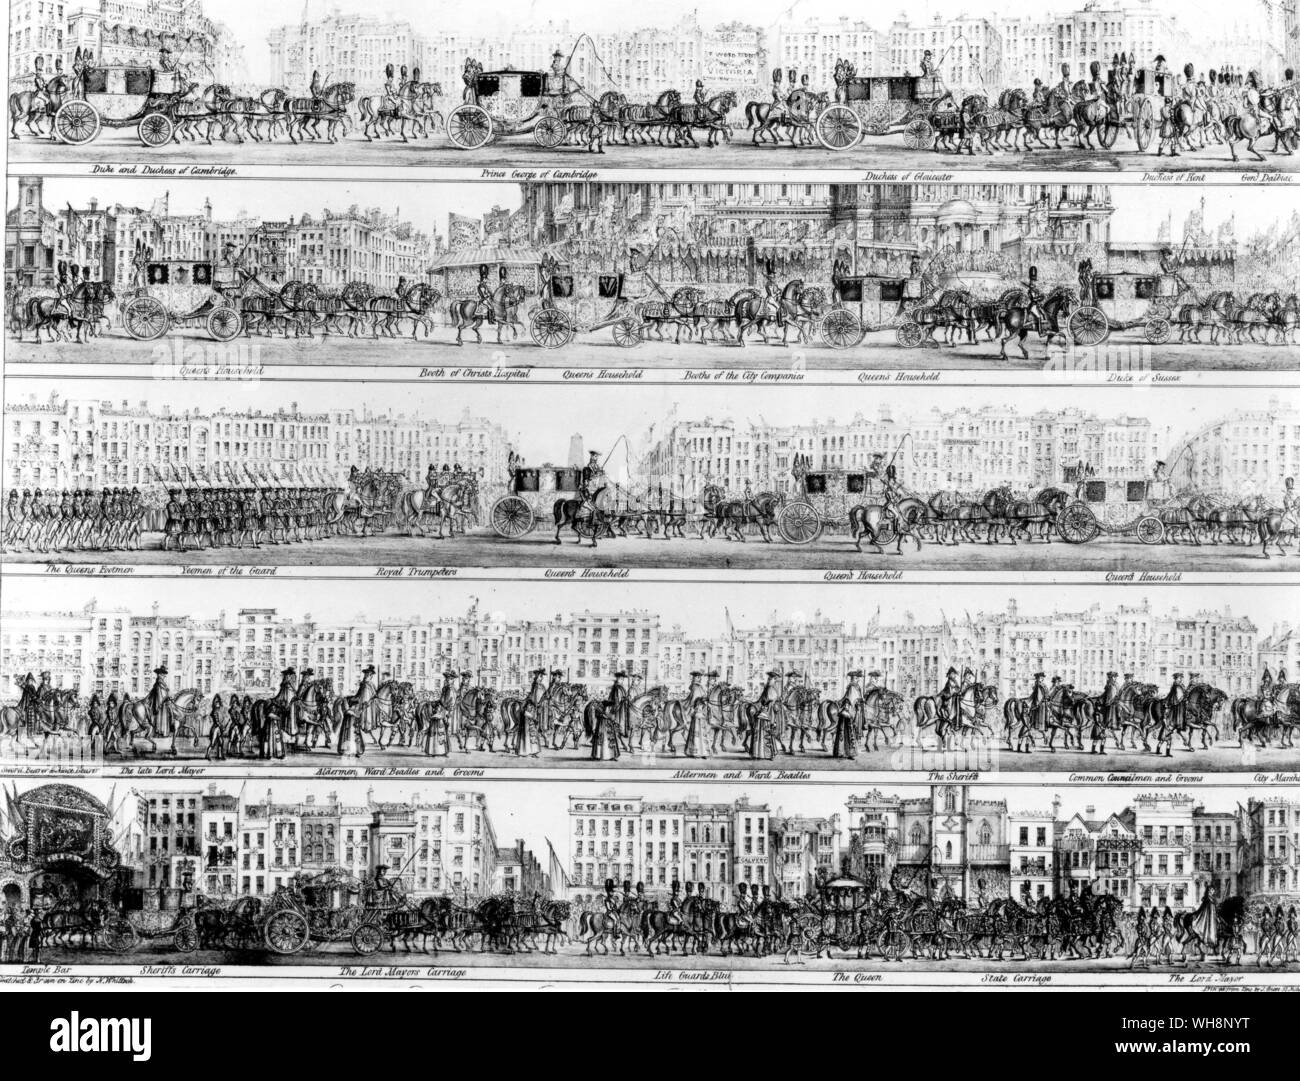 Royal procession from Temple Bar to Guildhall Lord Mayor Day 9 November 1837 .. The Queen's Stage Coach in the bottom row Stock Photo